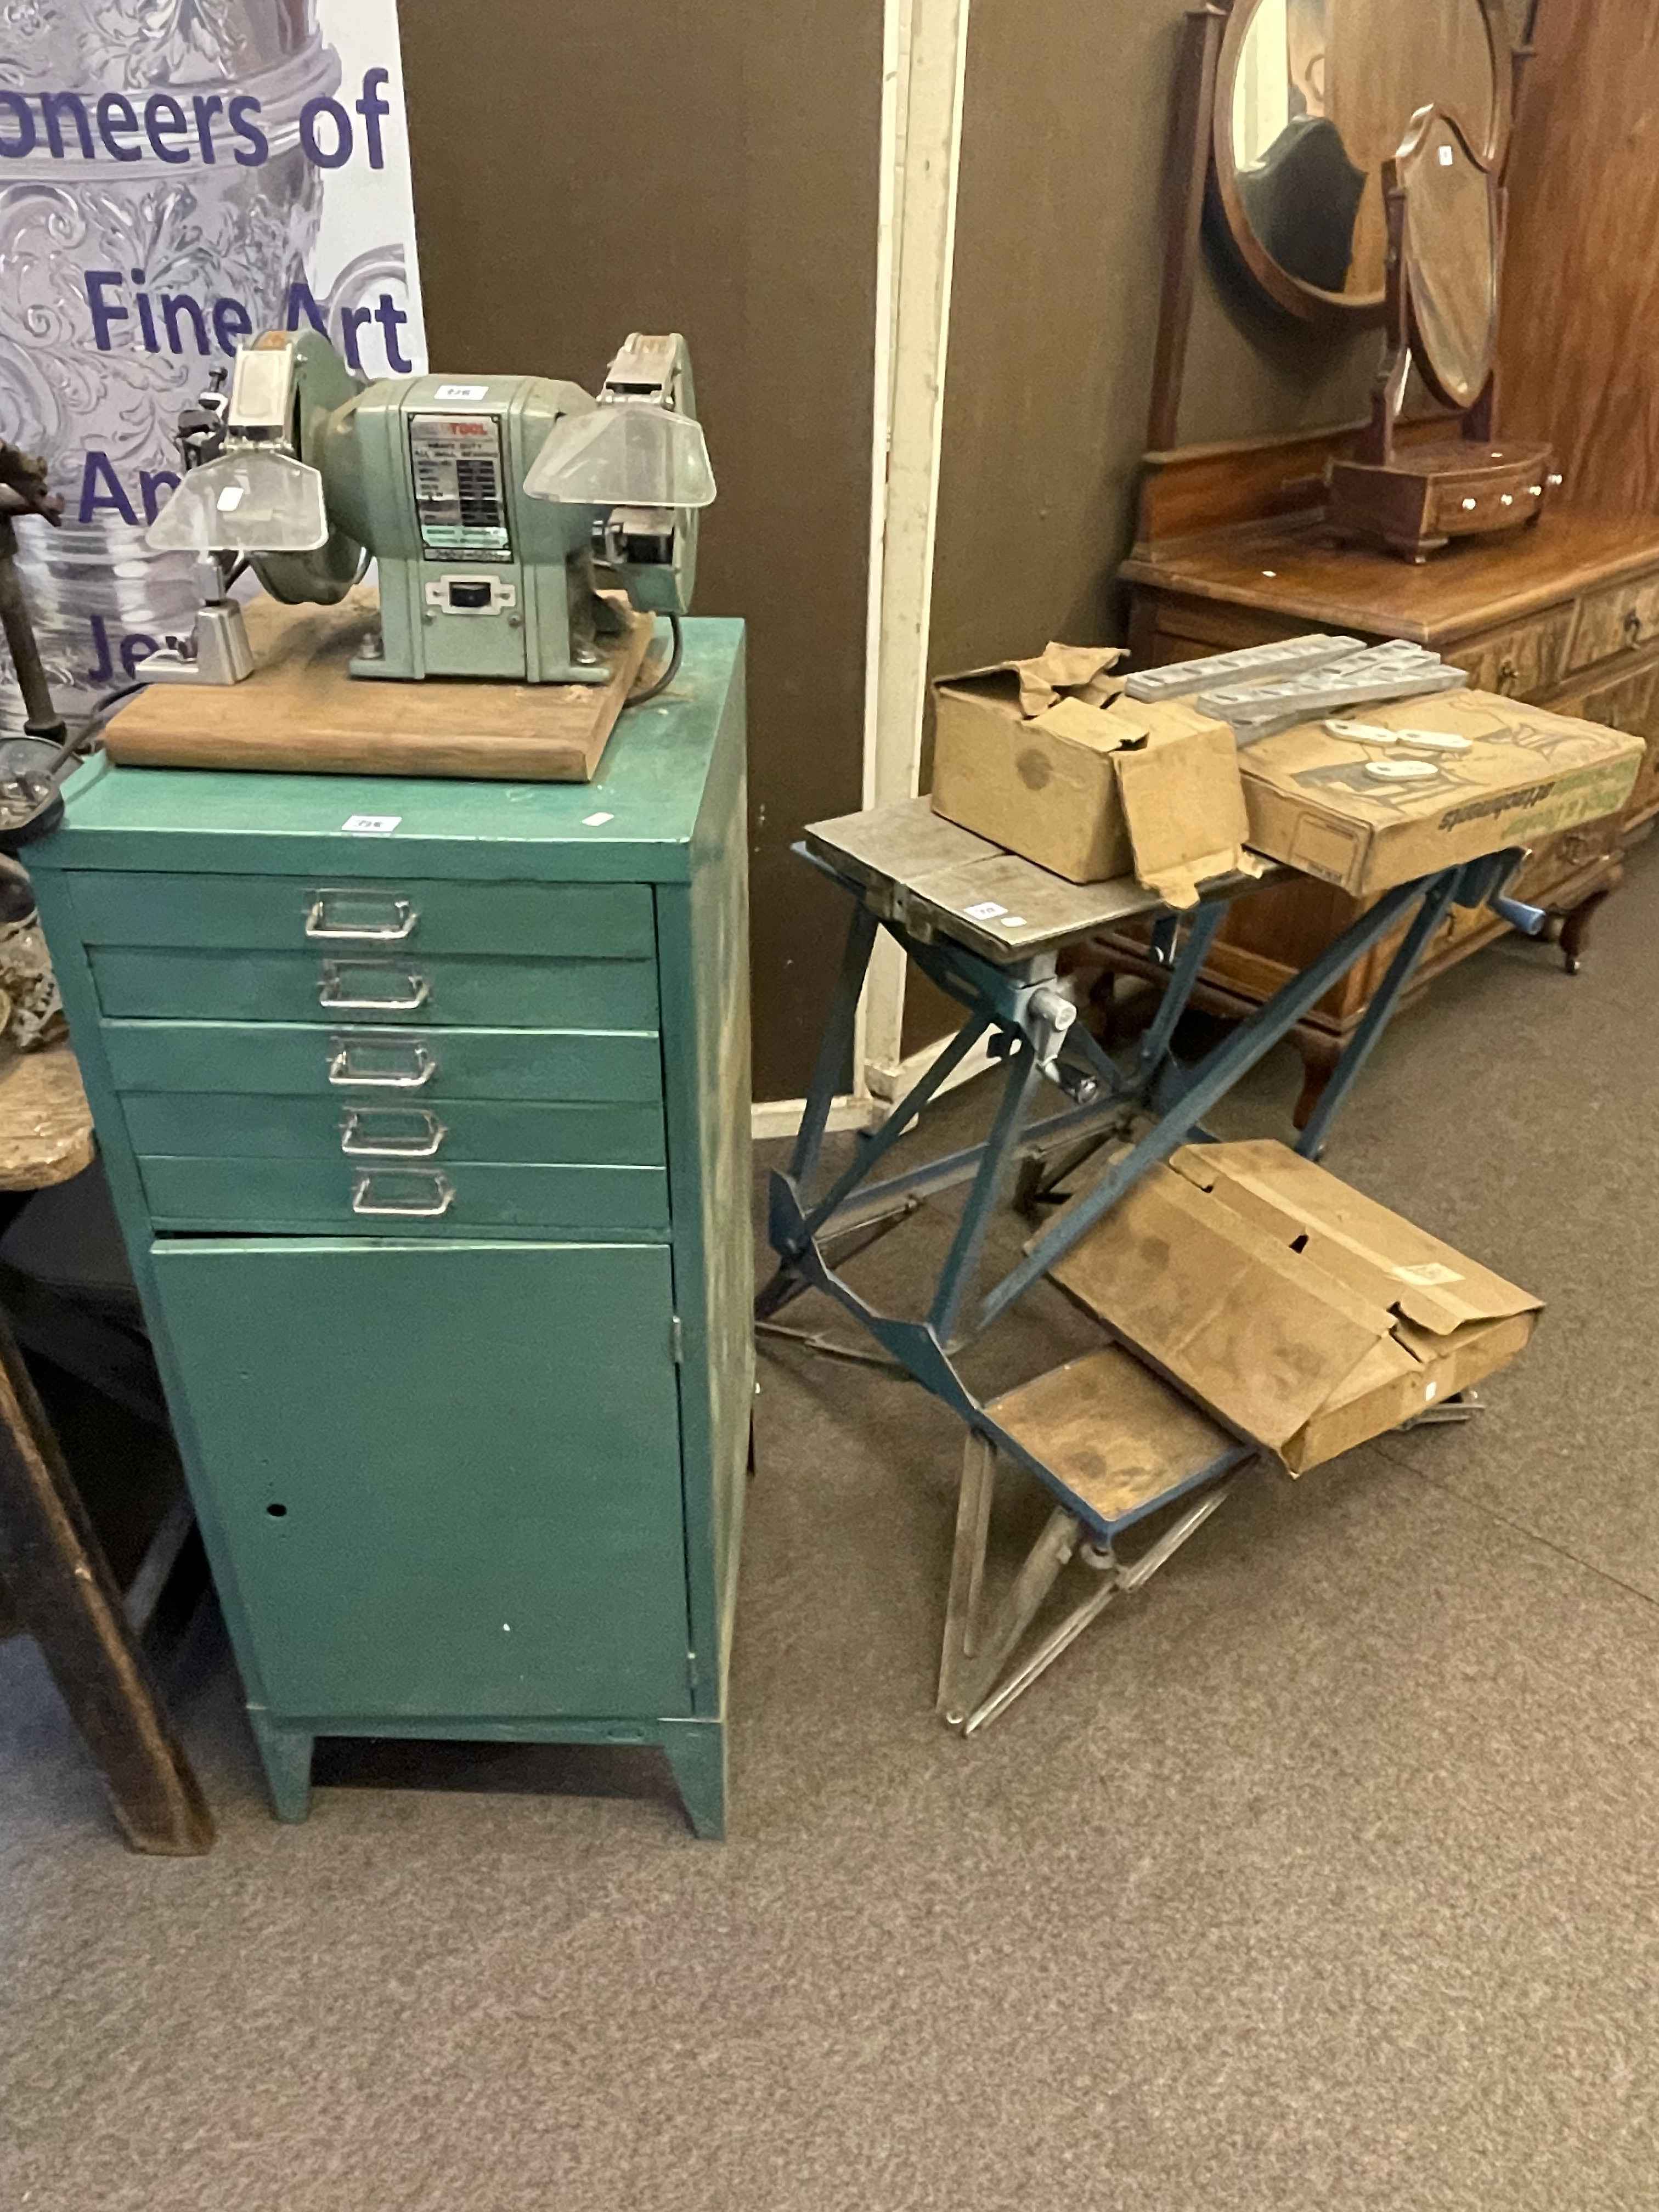 Mig and Arc welders, bench grinder, various tools, cabinets and work bench. - Image 2 of 2